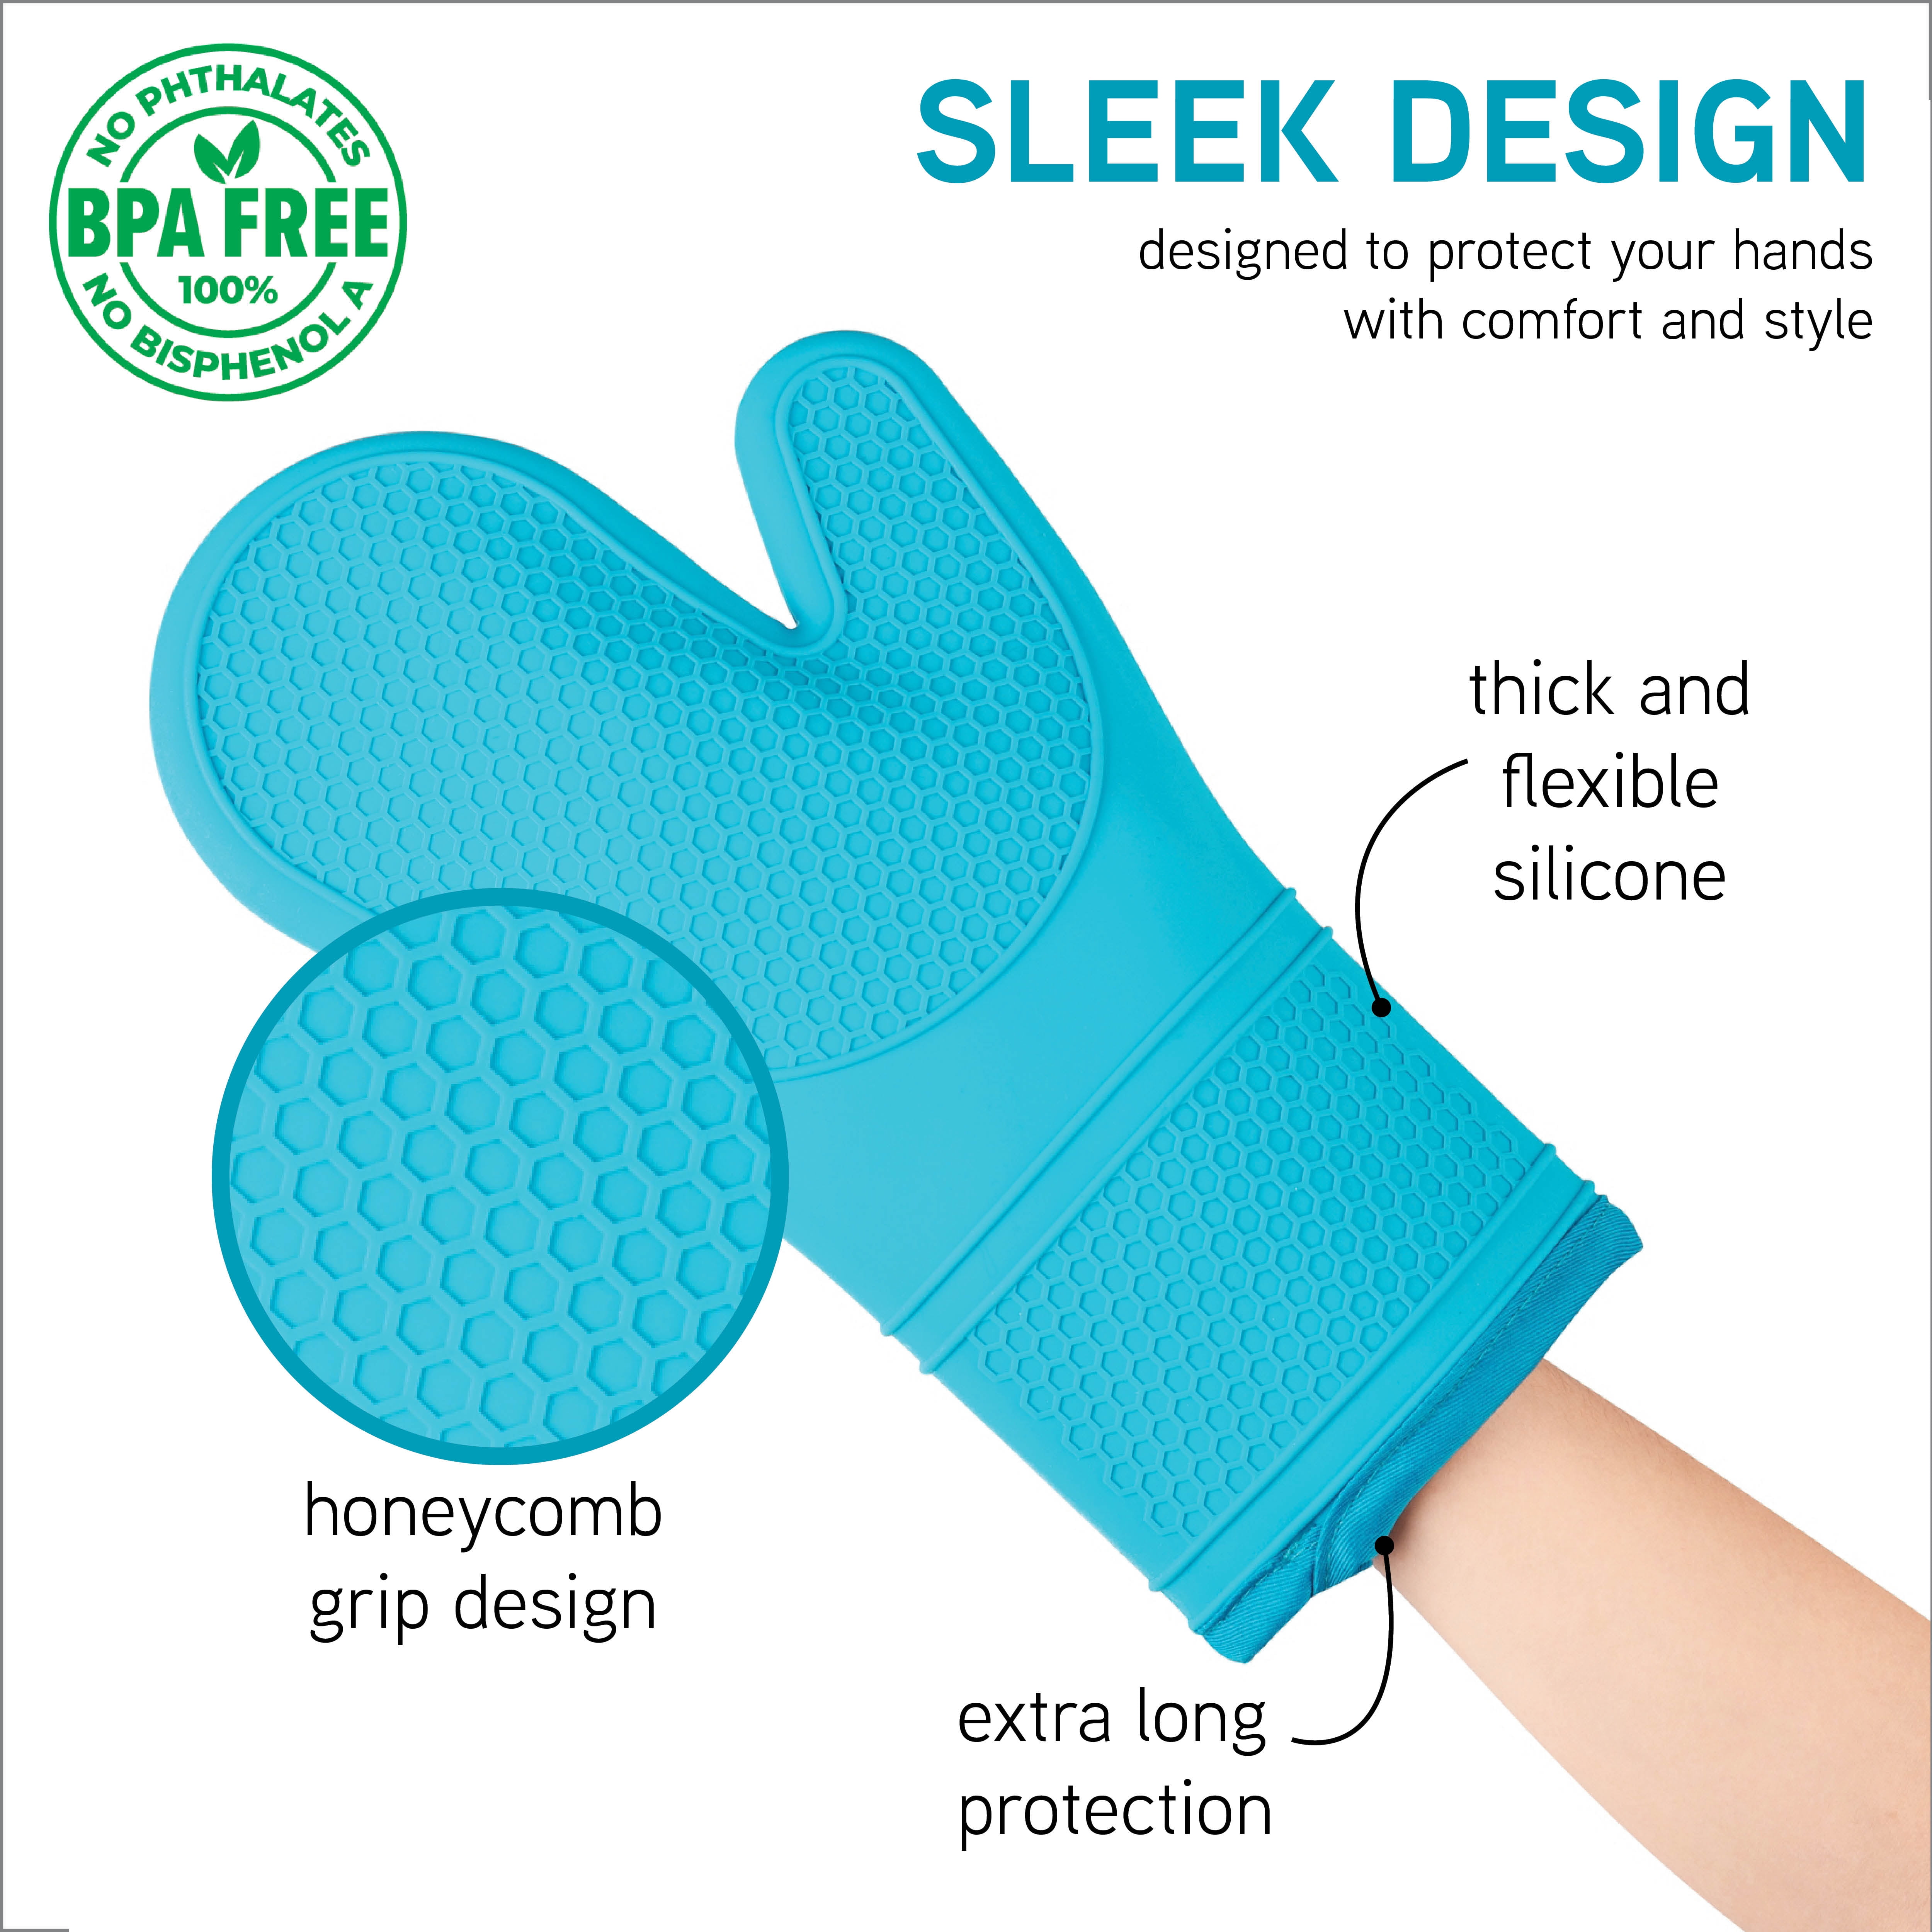 Klex 15inch Silicone Oven Mitts, Up to 932F Heat Resistance, Comfortable Fleece Quilted Cotton lining, Blue, Set of 2